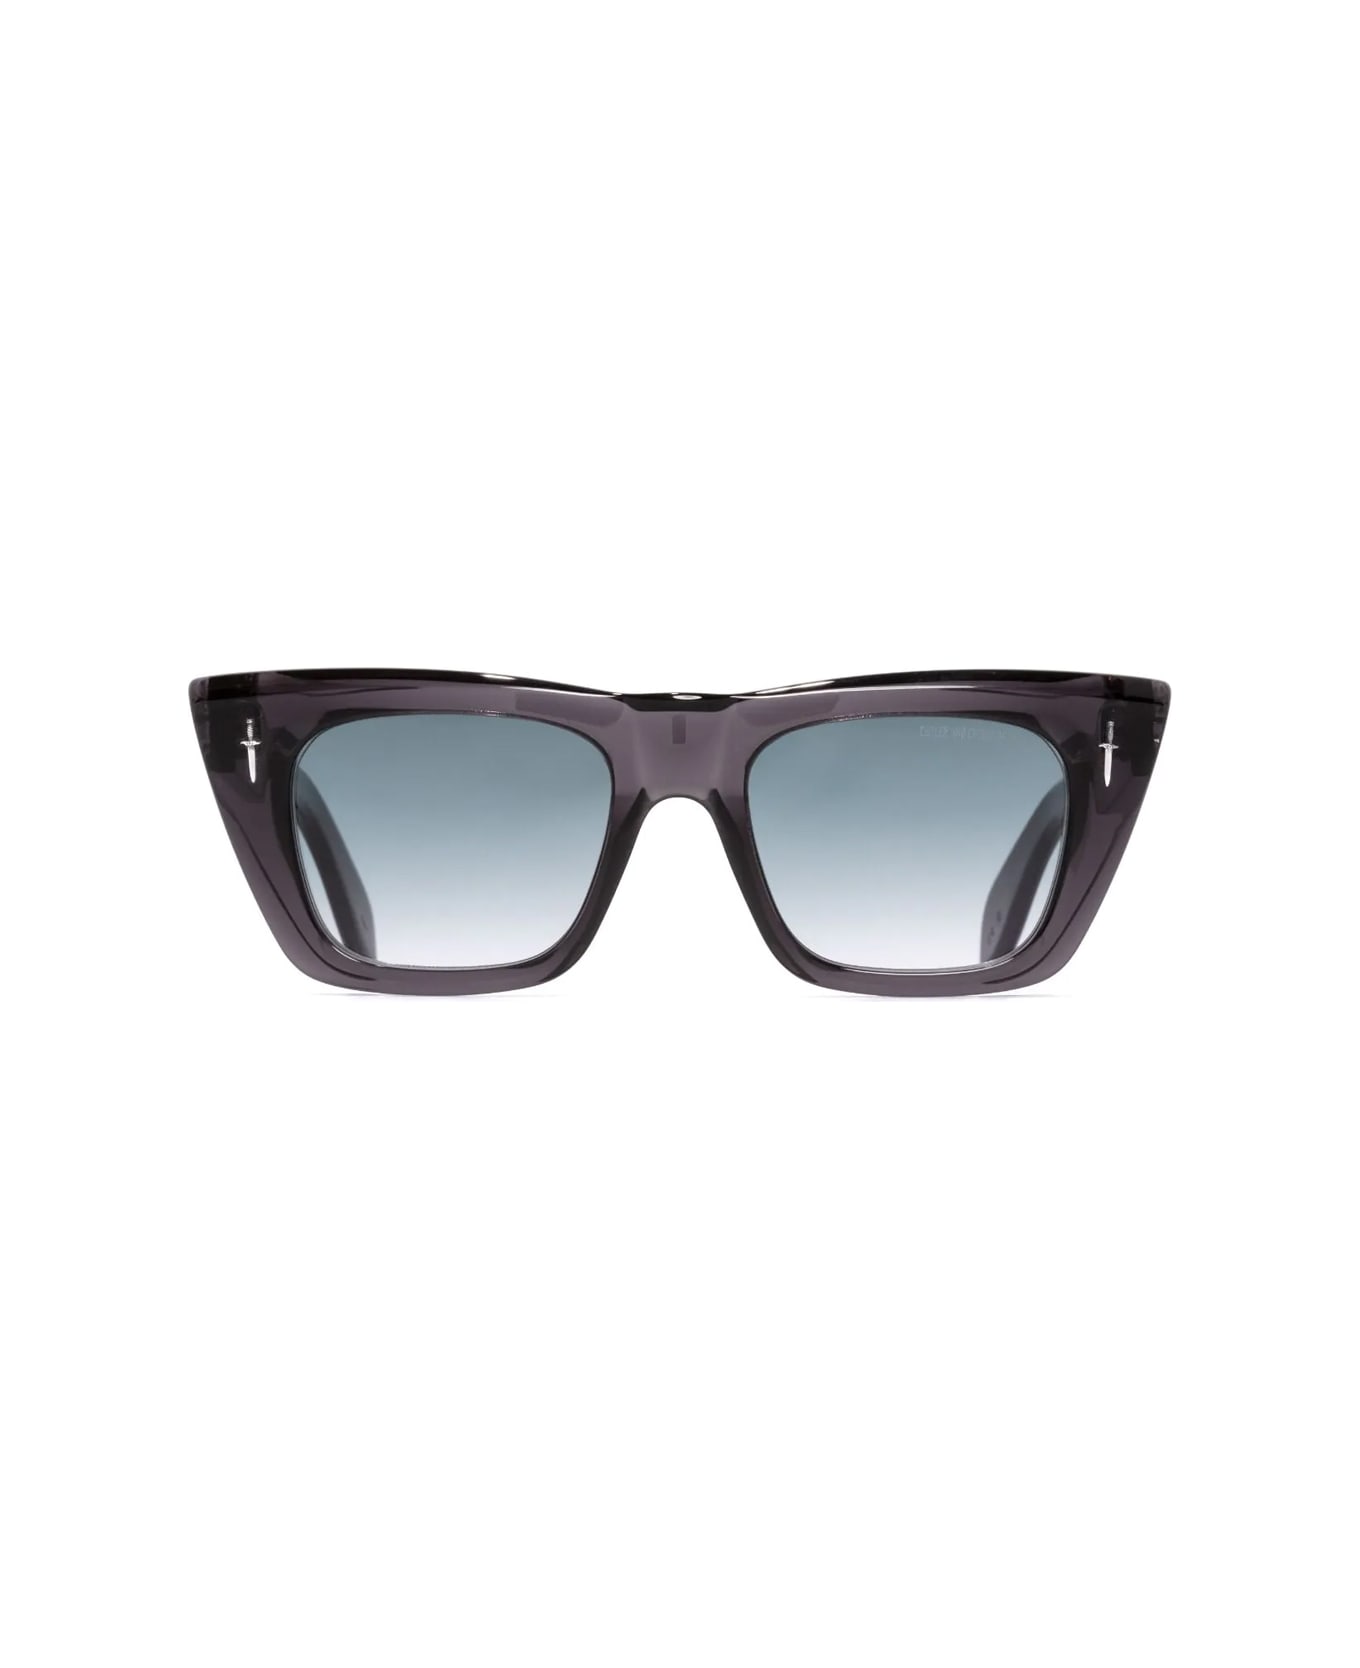 Cutler and Gross The Great Frog 008 03 Sunglasses - Grigio